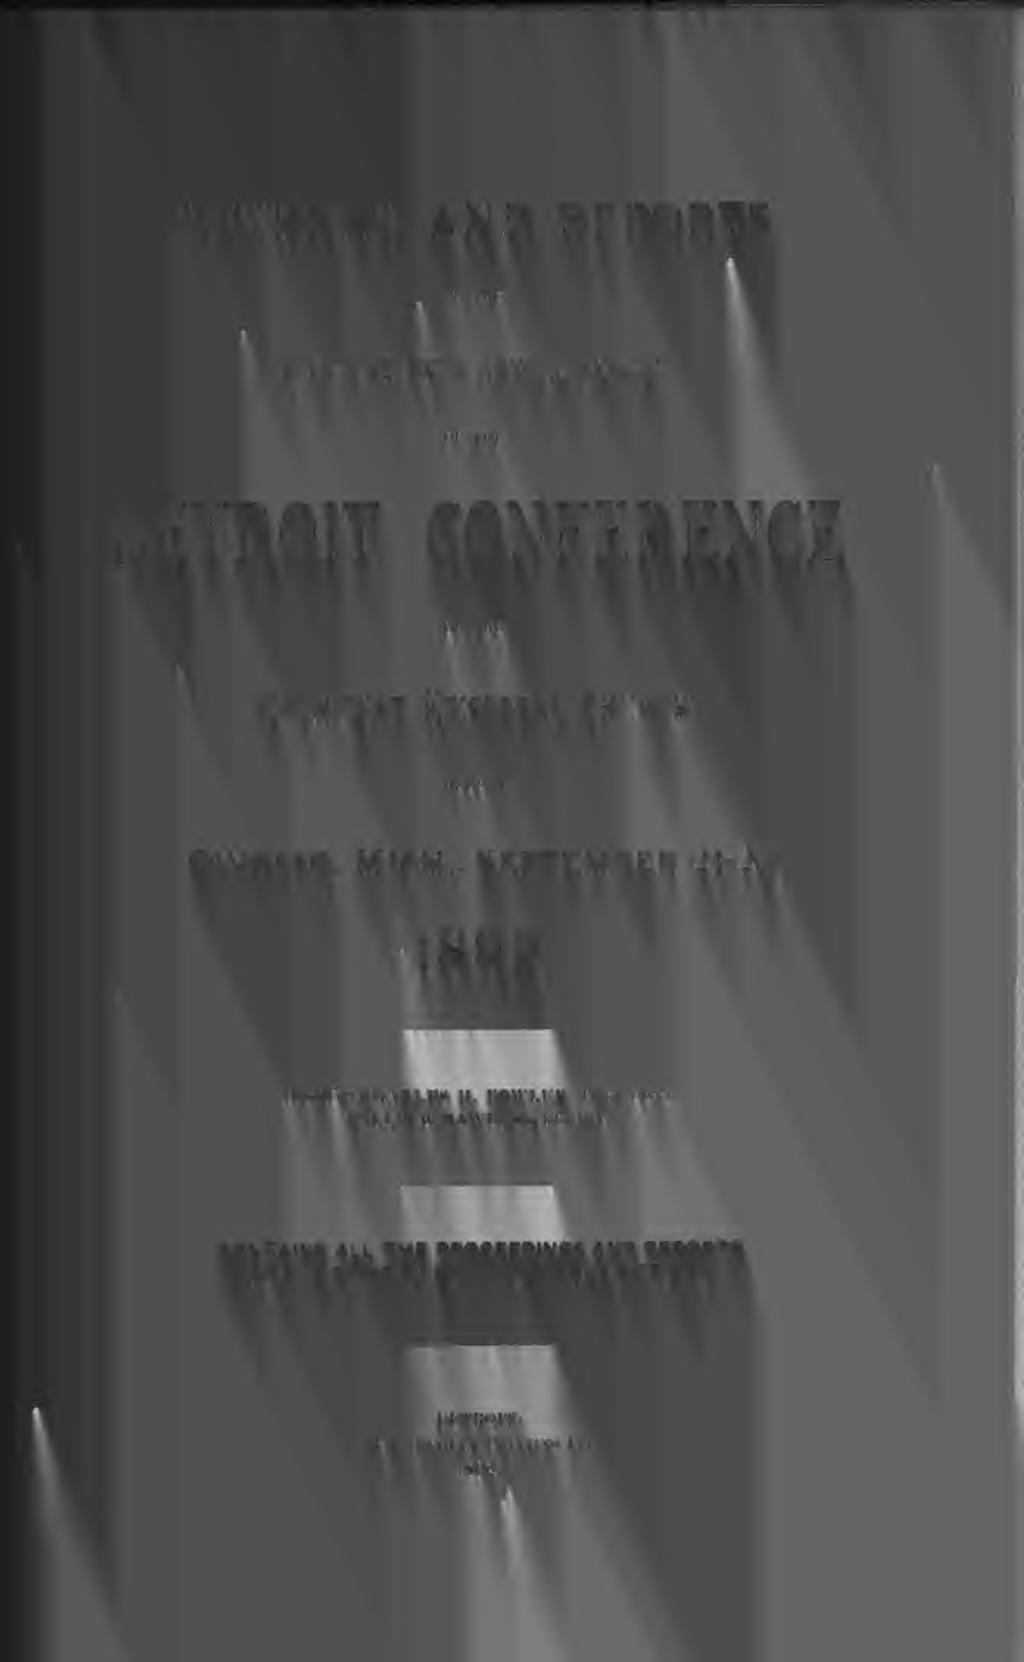 JOURNAL AND REPORTS OF THE THRTY-SEVENTH ANNUAL SESSON OF THE DETROT CONFERENCE